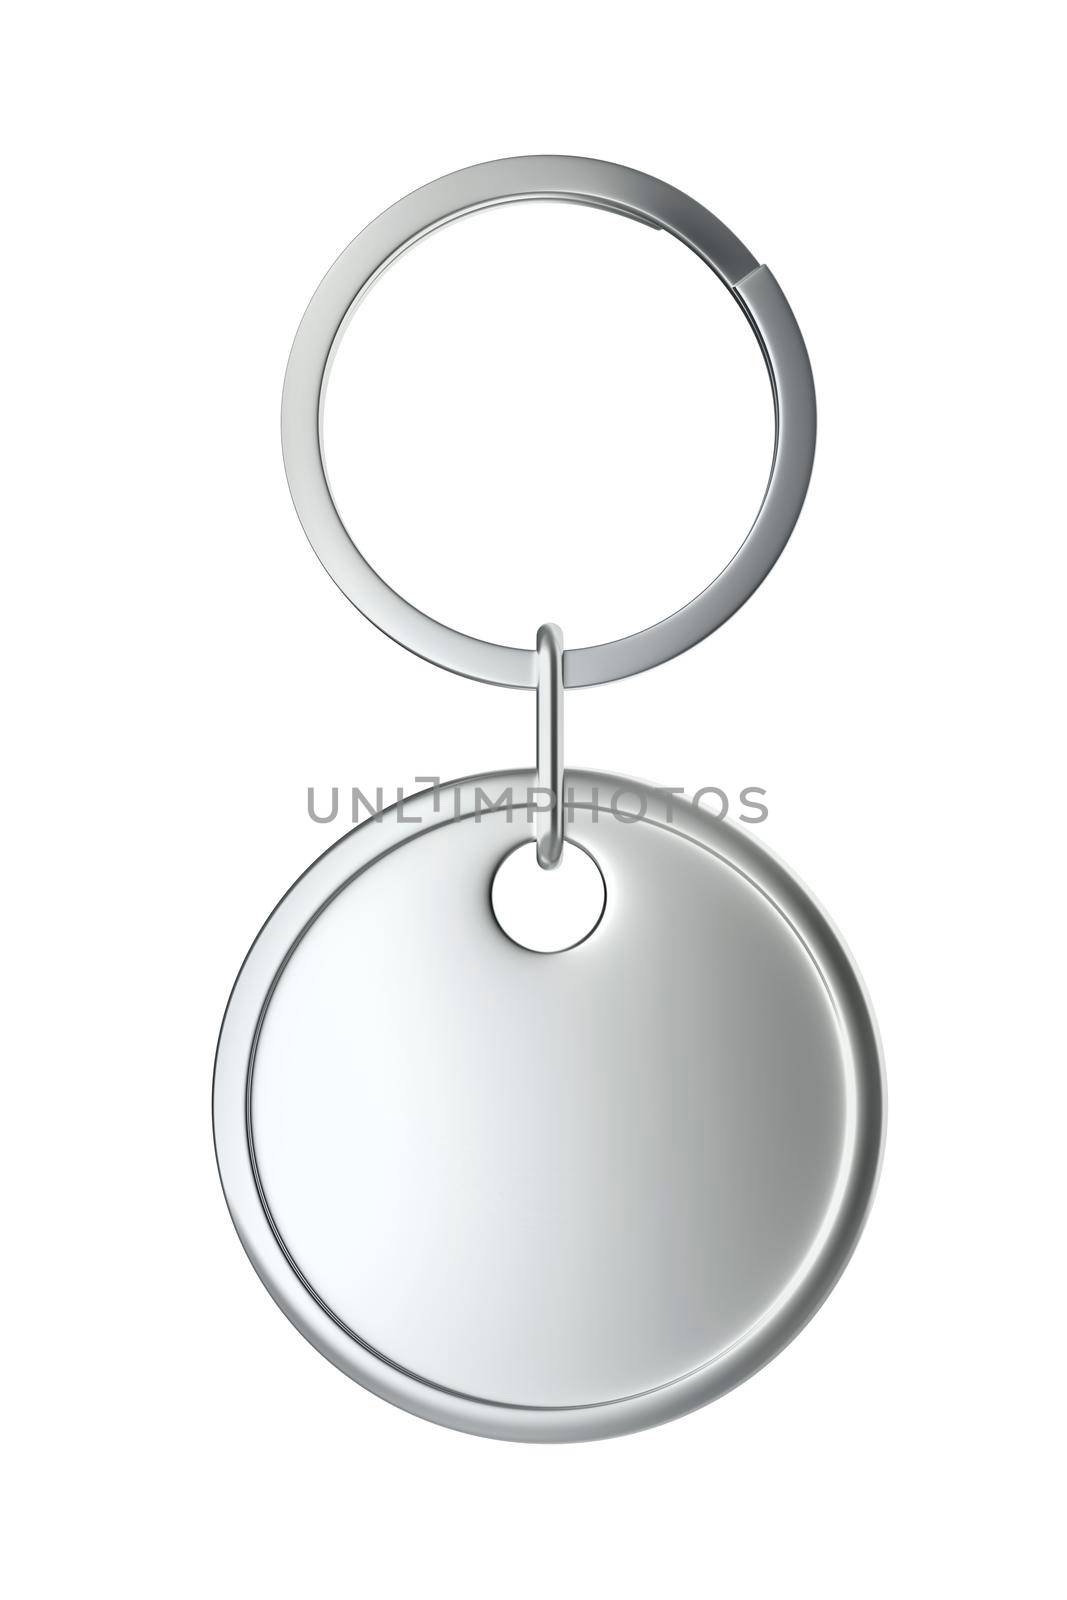 Round silver keychain isolated on white background, front view